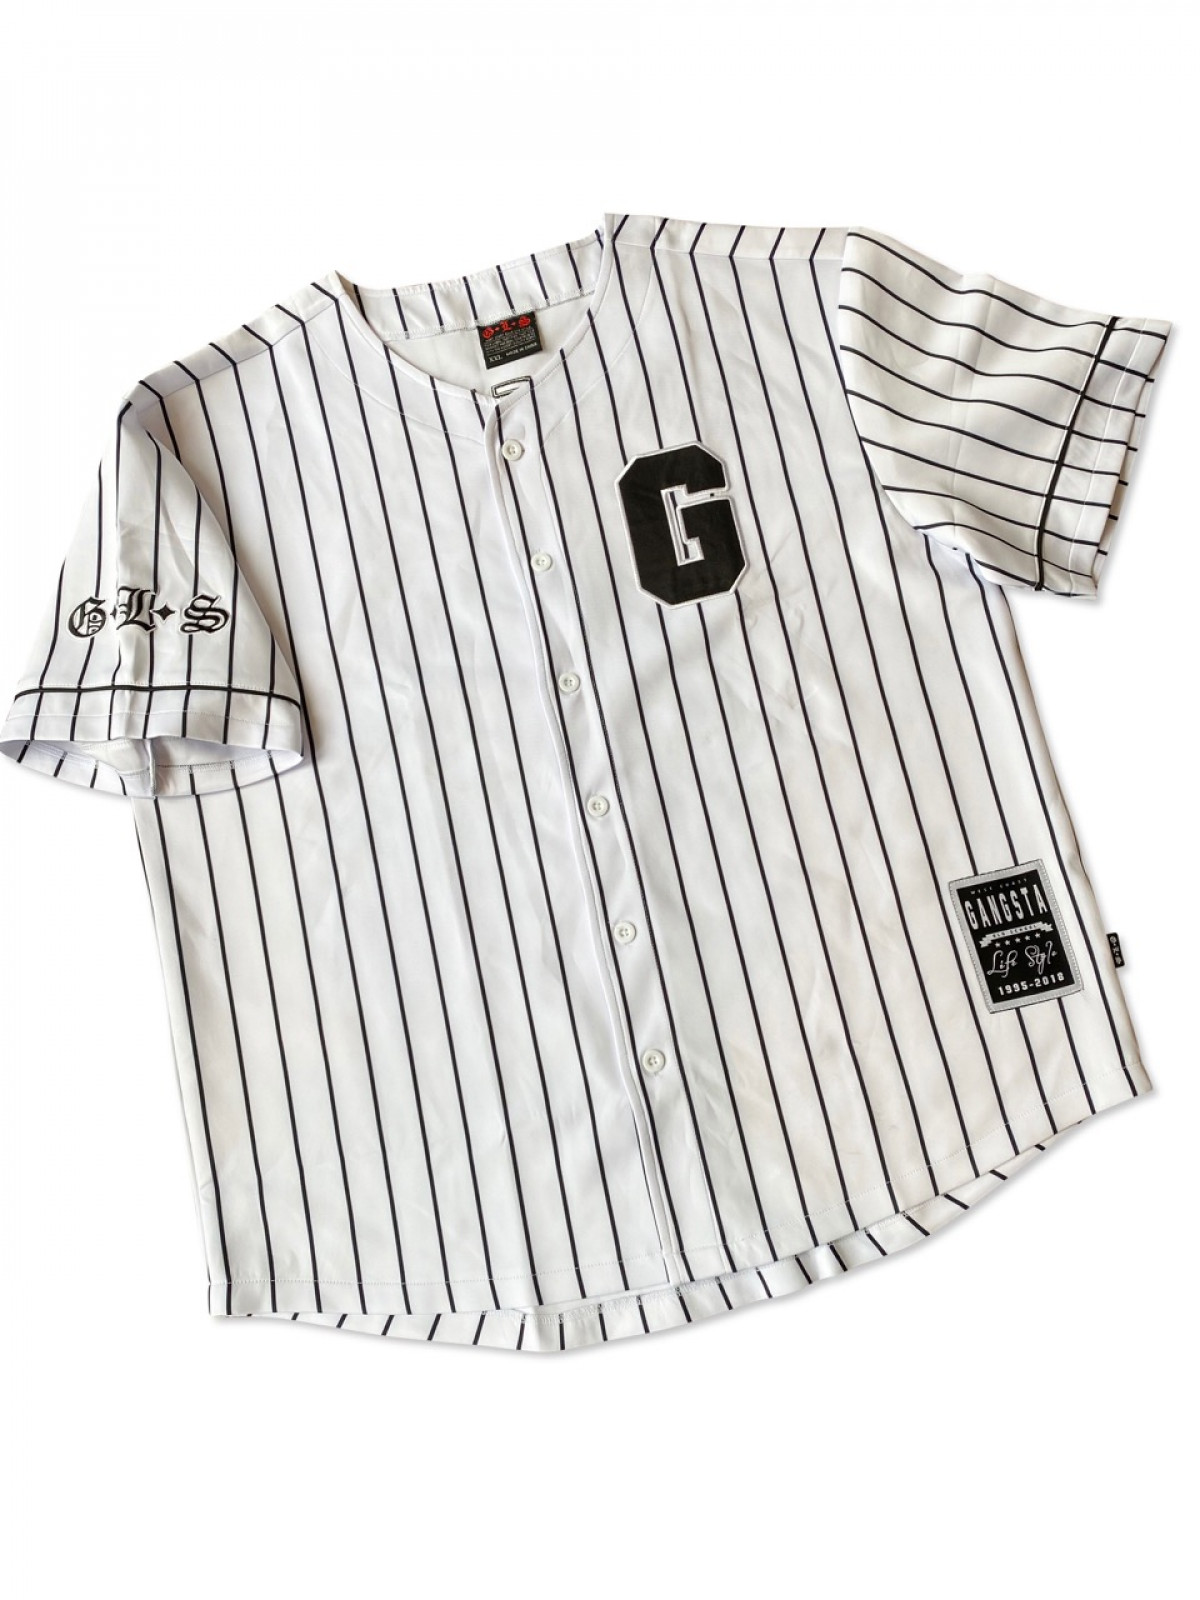 custom baseball shirts withers and co1